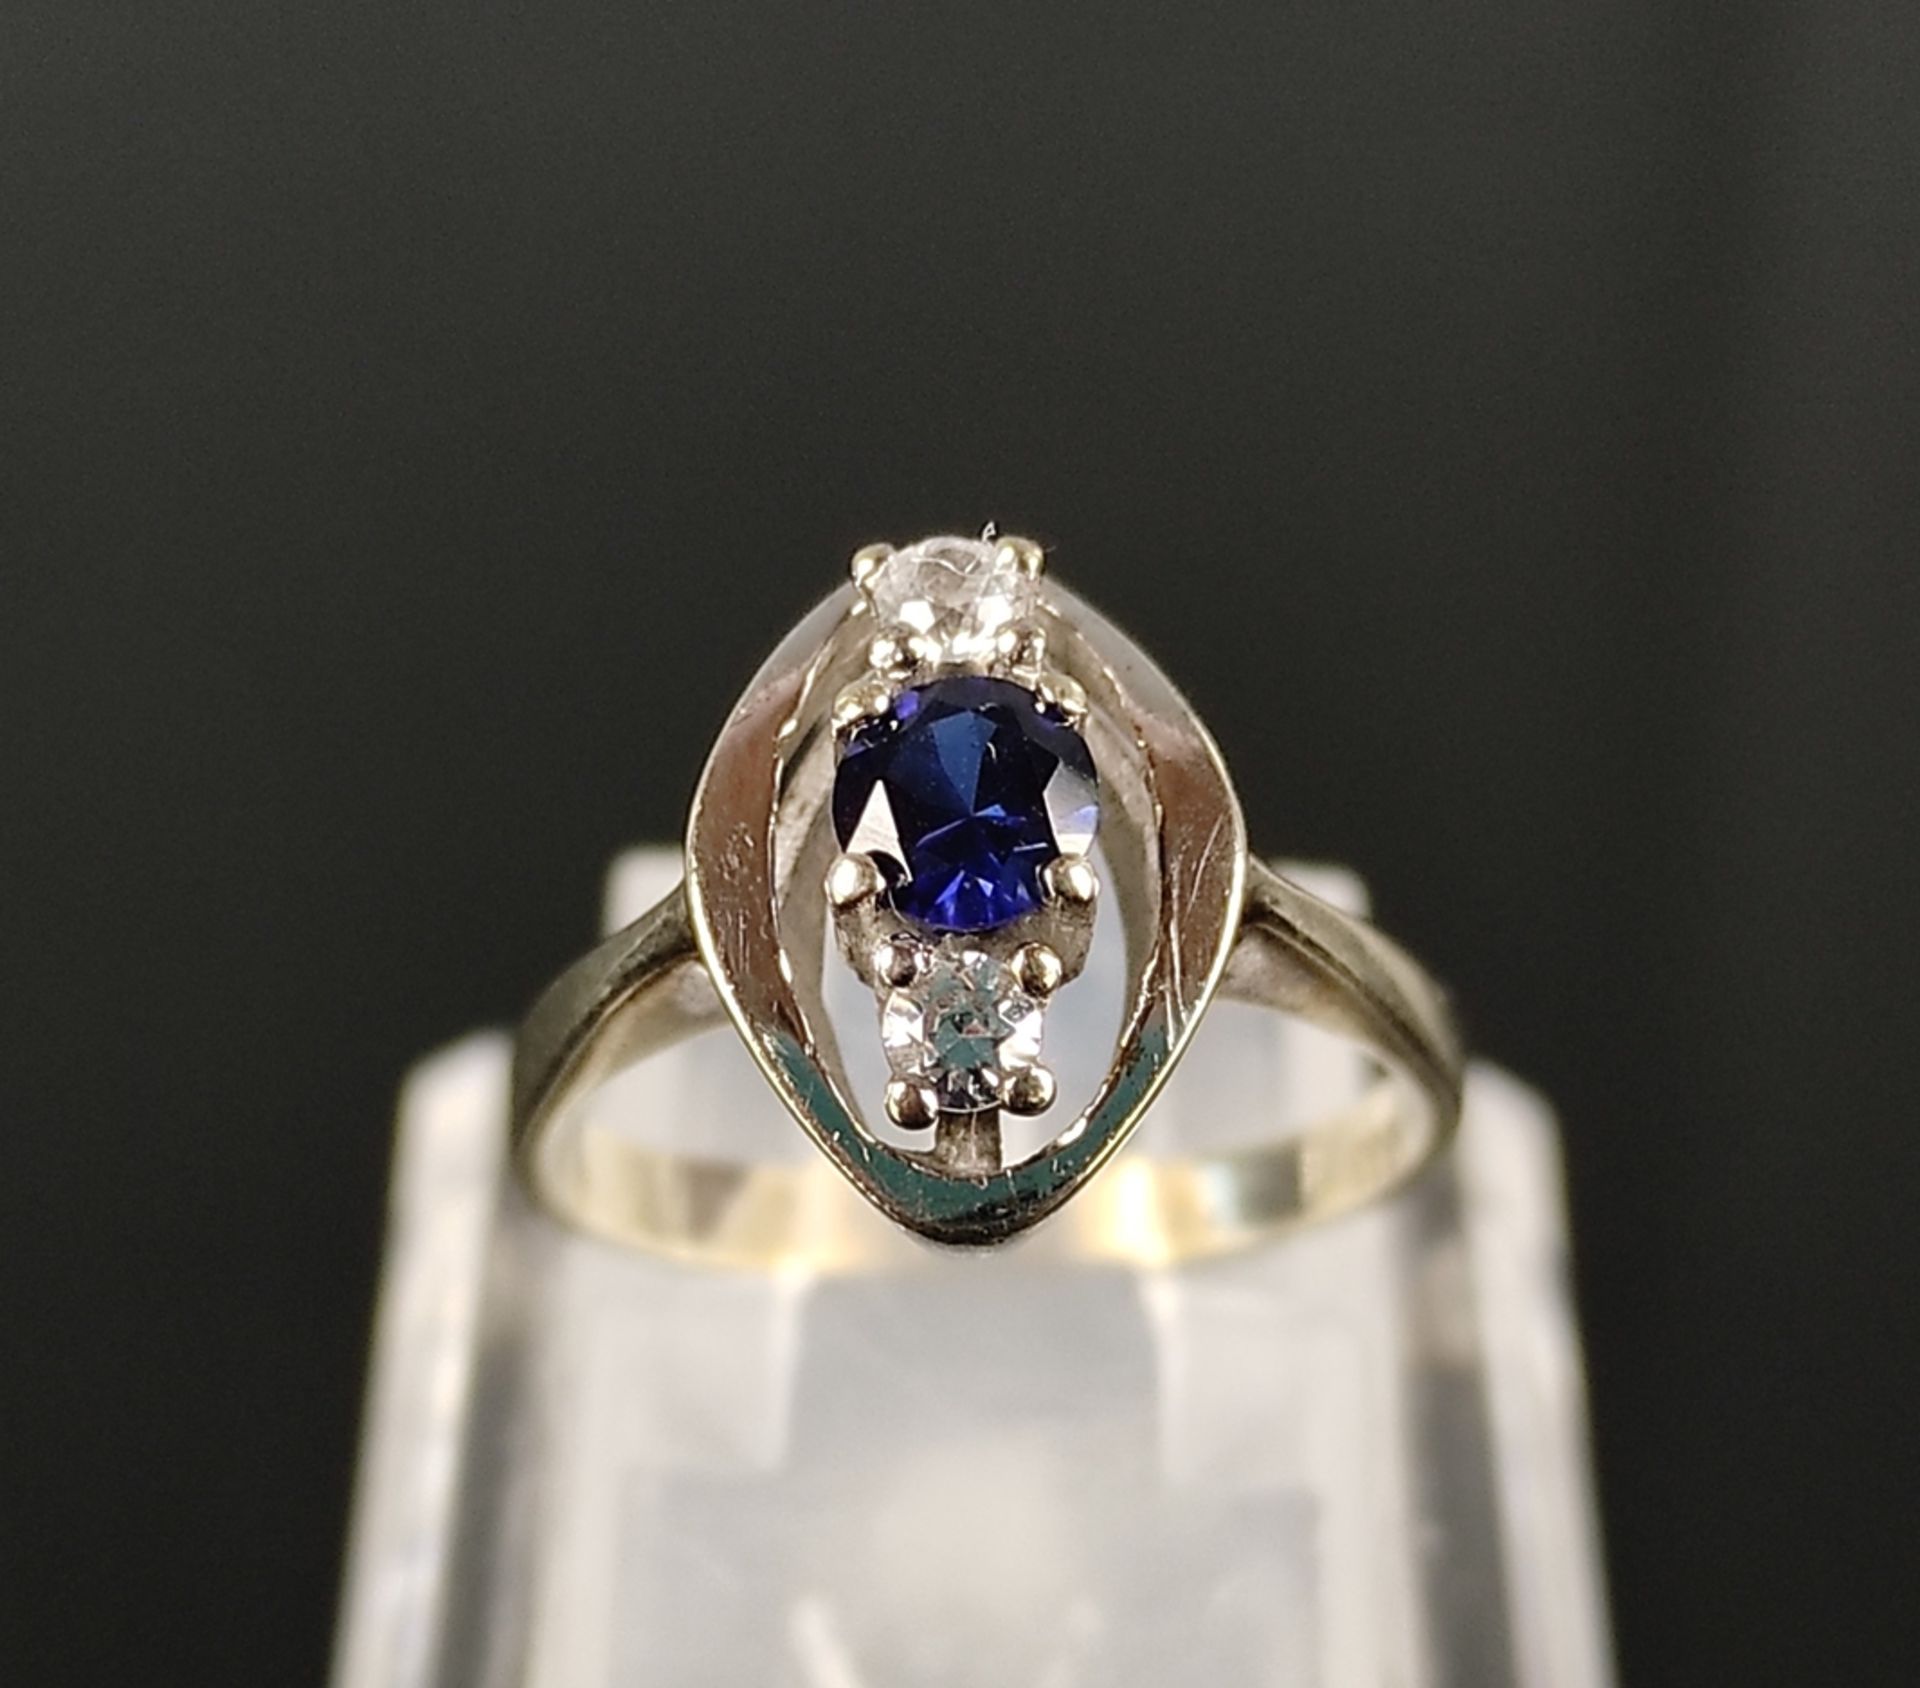 Sapphire ring, two cubic zirconia and center sapphire around 0.4ct, 333/8K white gold, 2.7g, ring s - Image 3 of 4